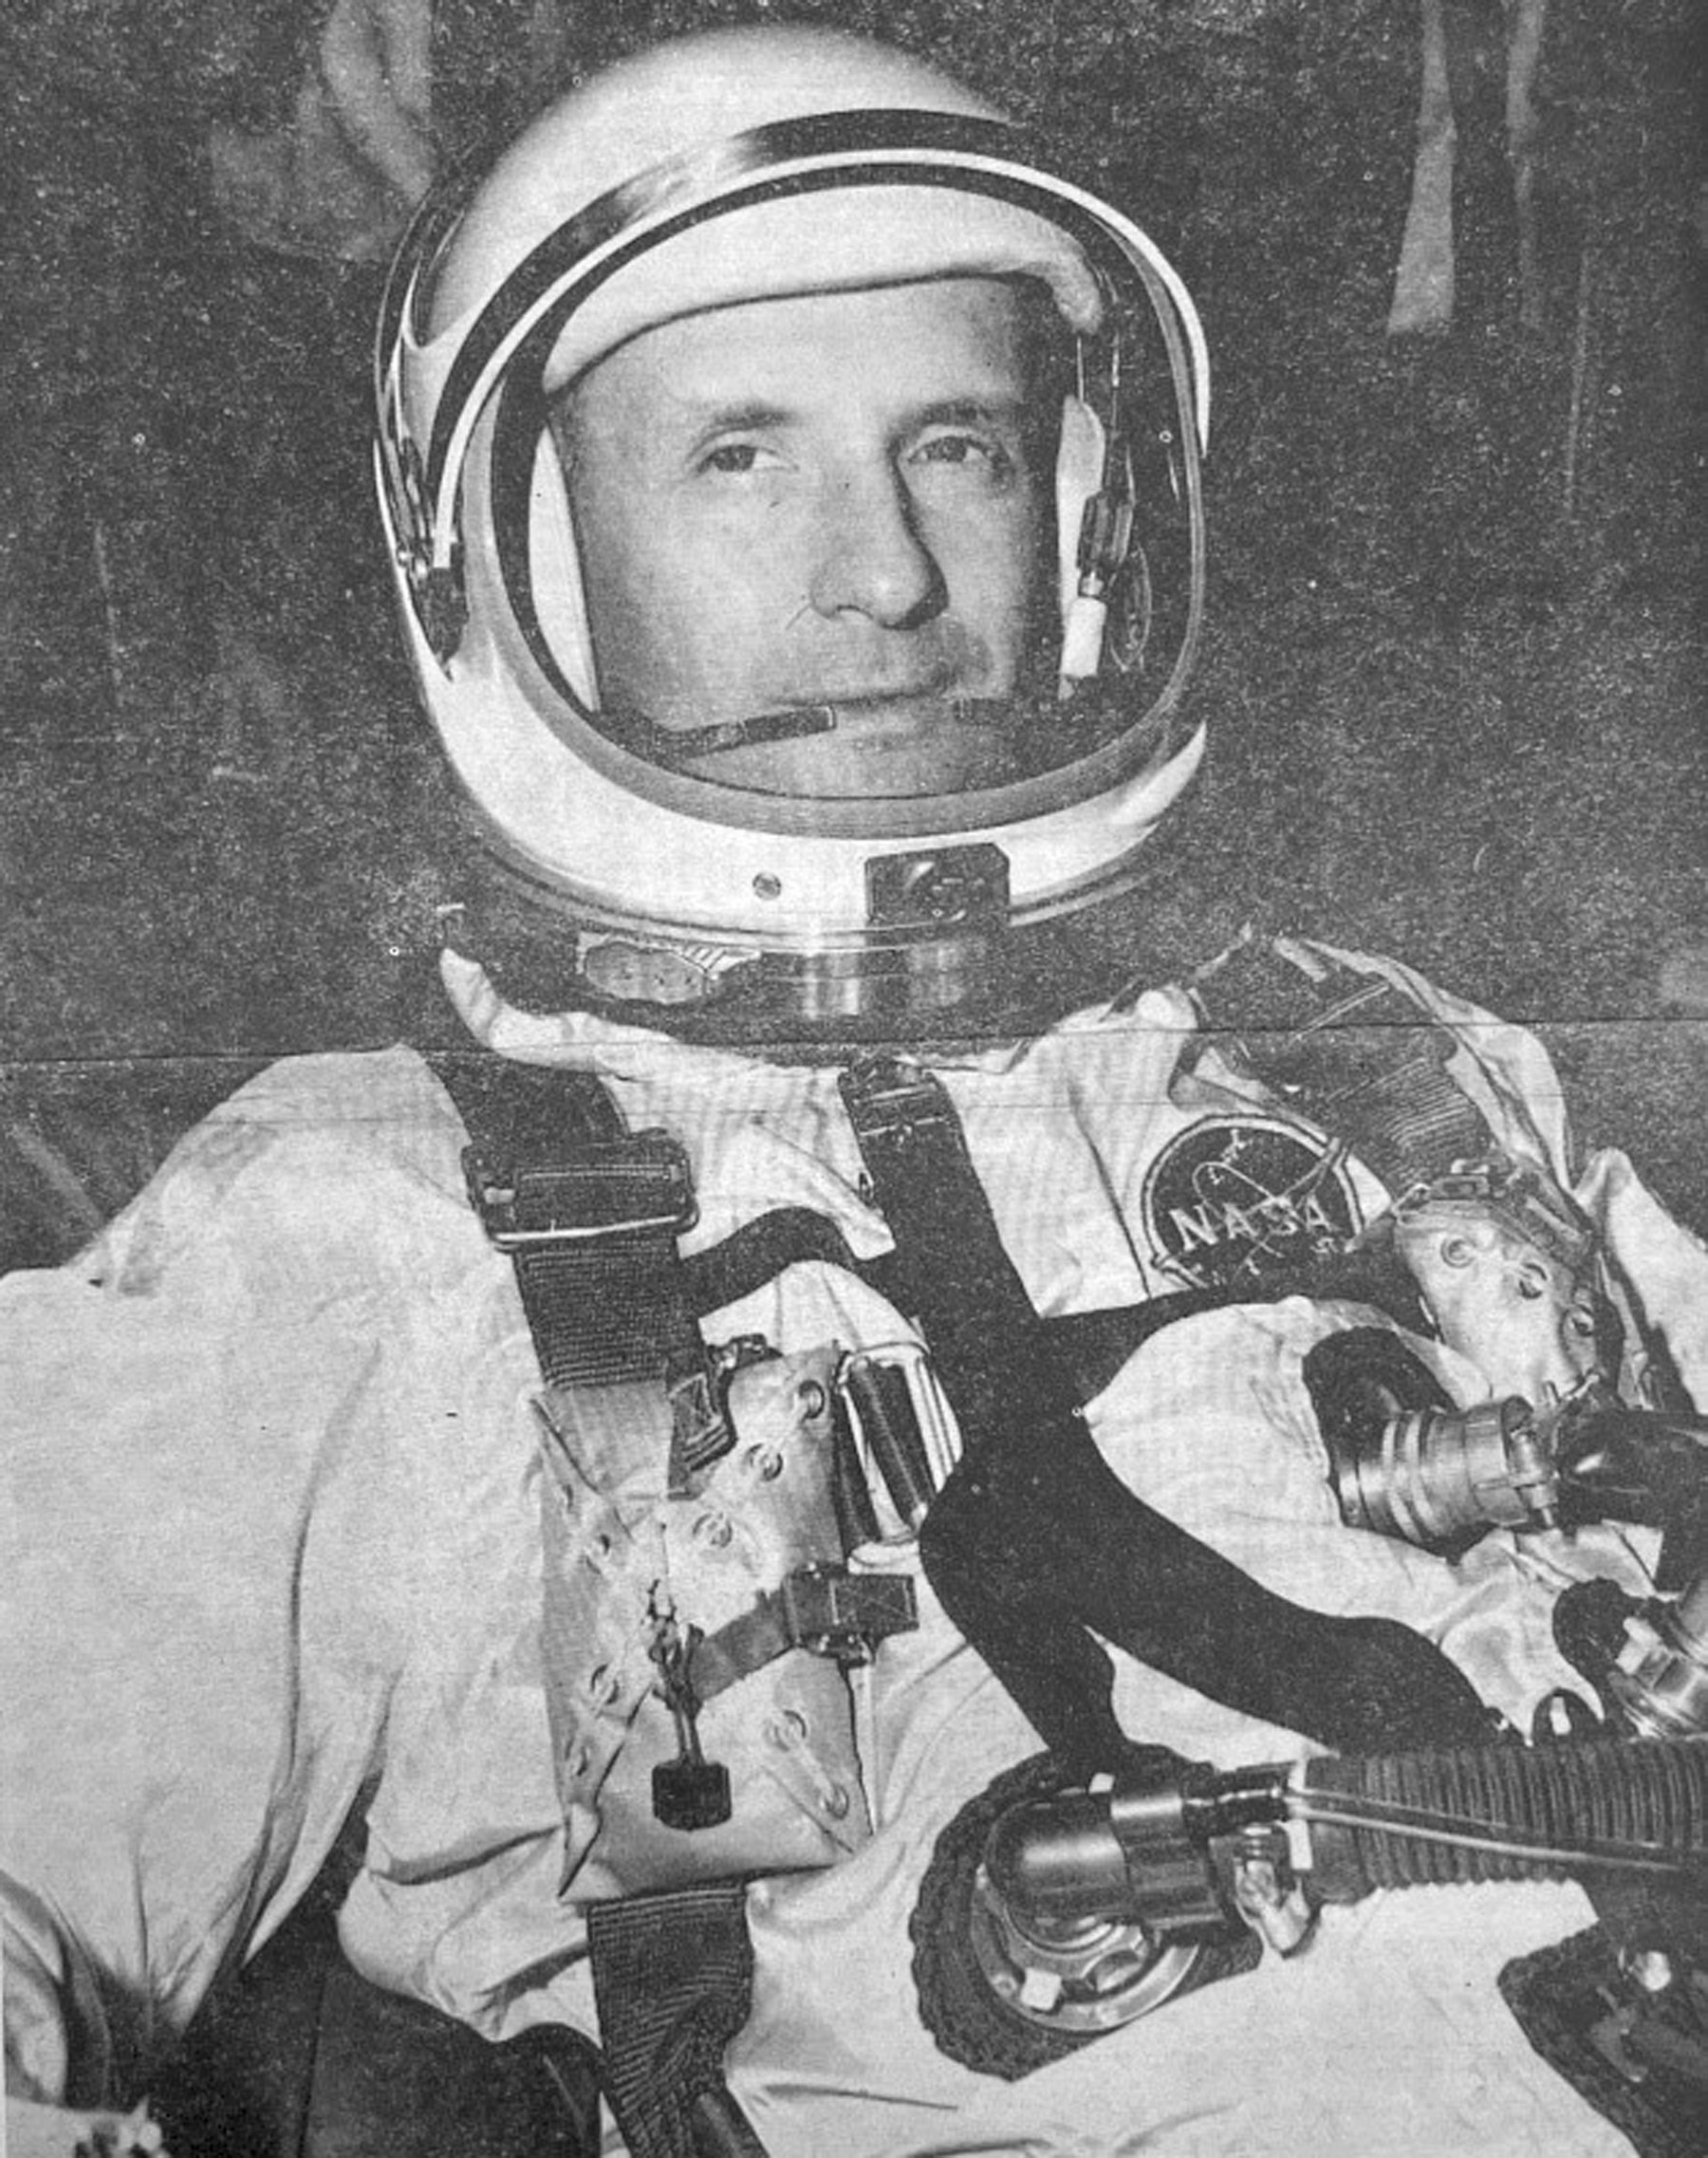 This picture, originally published in the Weatherford Daily News December 9, 1965, shows Gen. Tom Stafford in his space flight suit before the launch of Gemini 6.